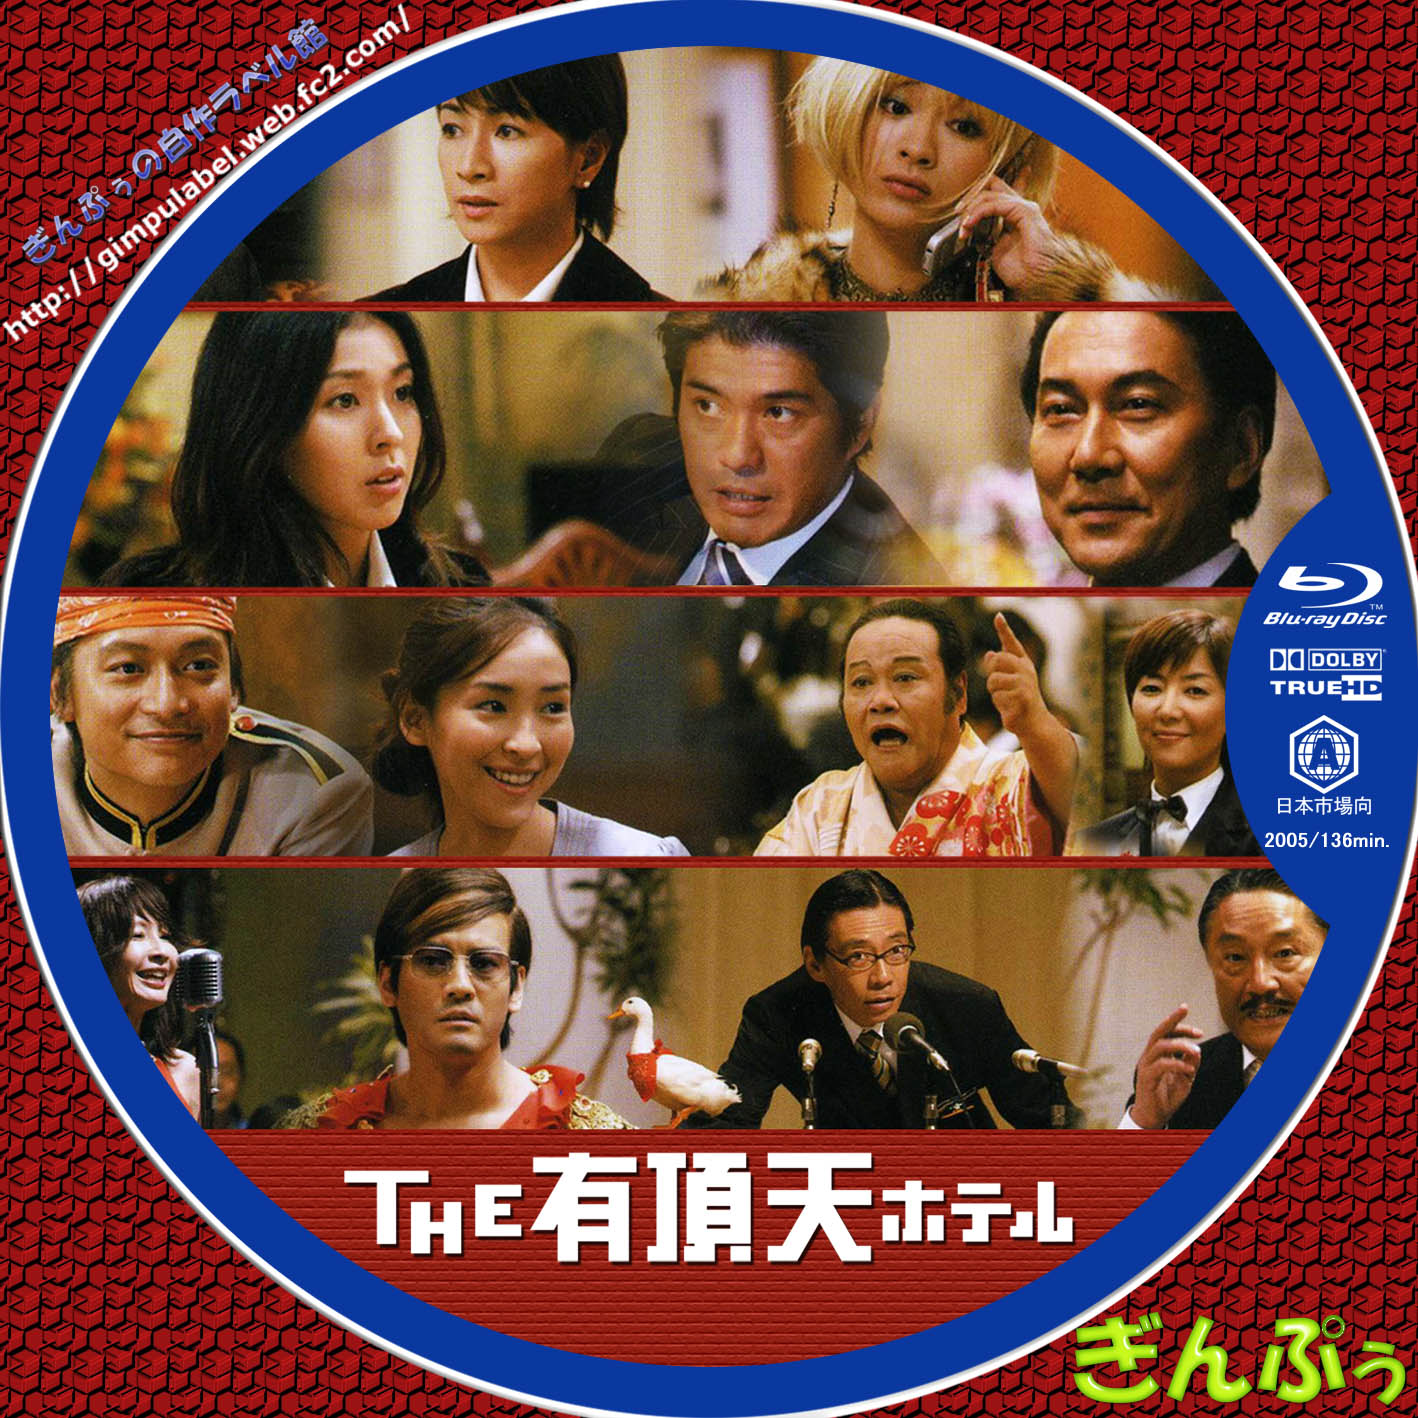 The有頂天ホテル DVD